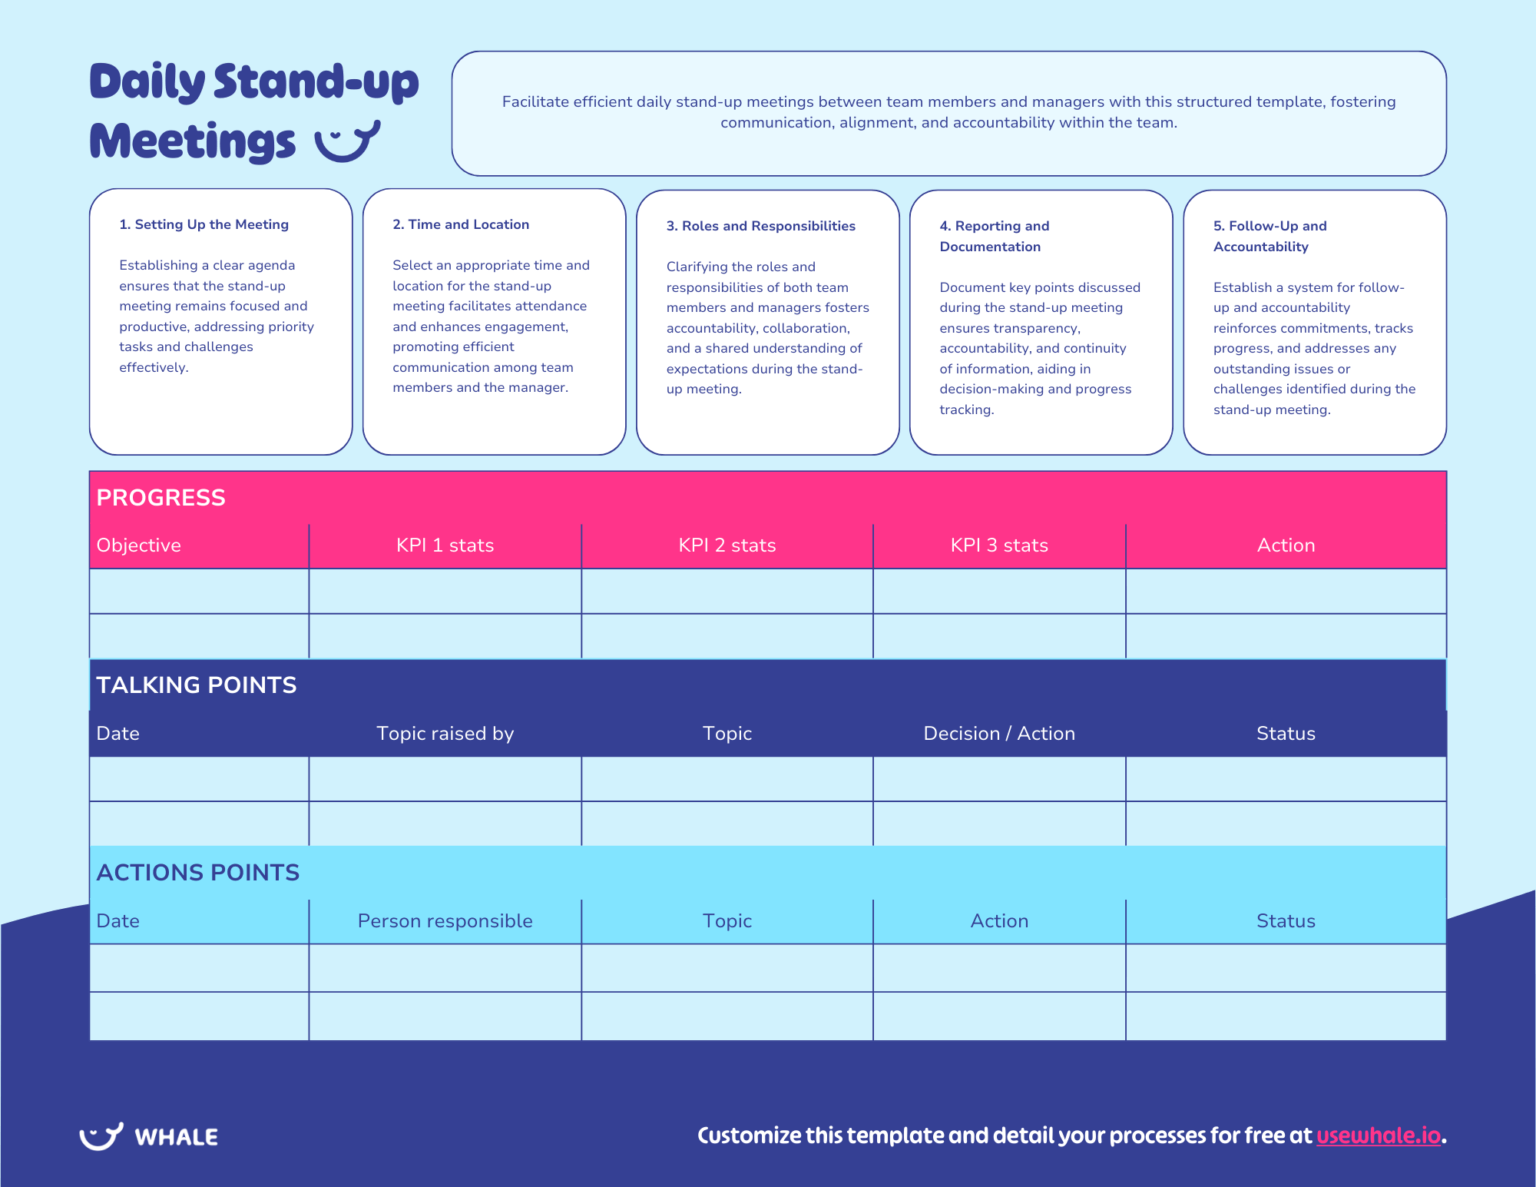 Infographic outlining the process for Daily Stand-up Meetings